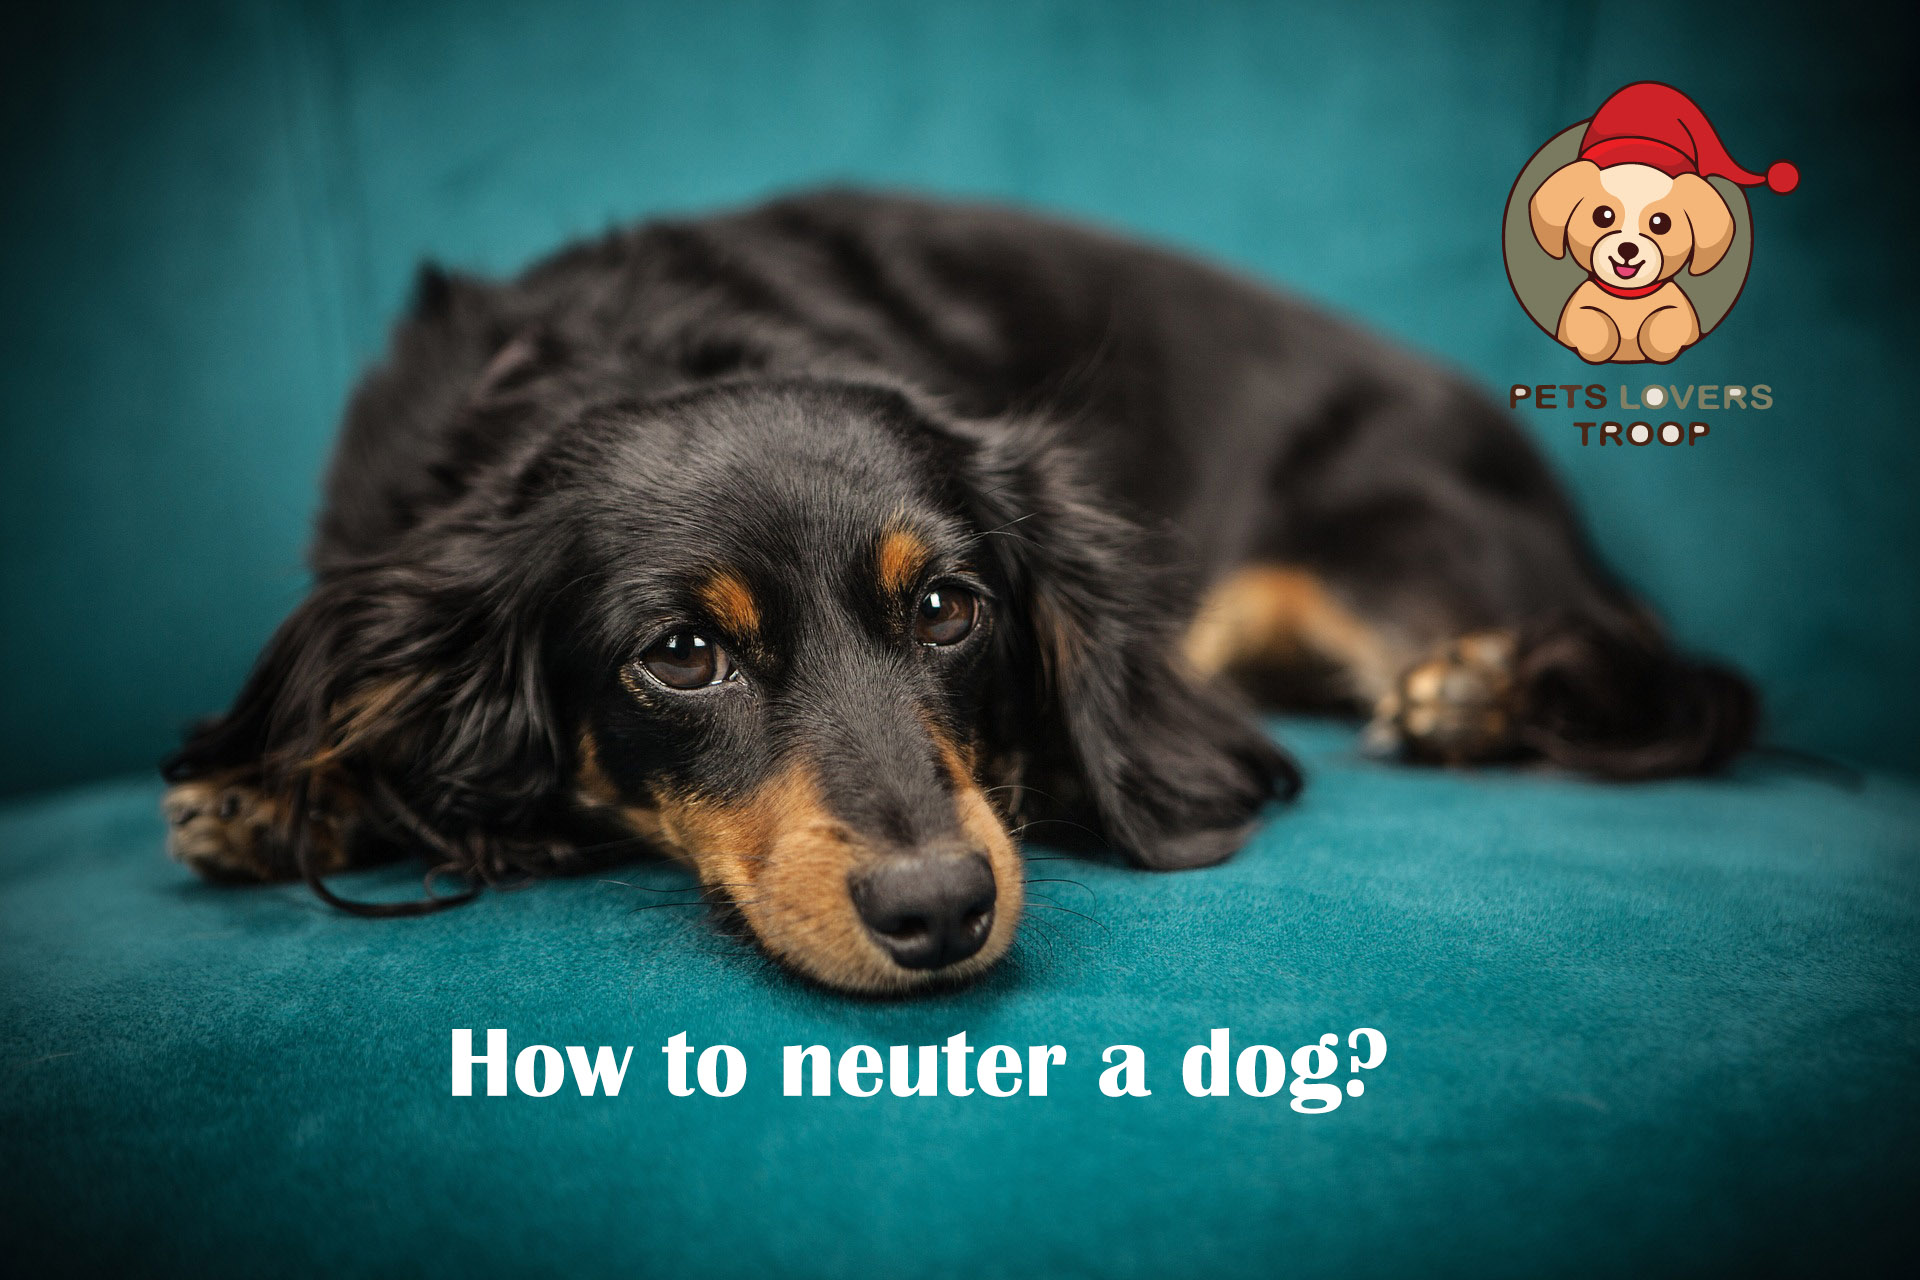 How to neuter your dog